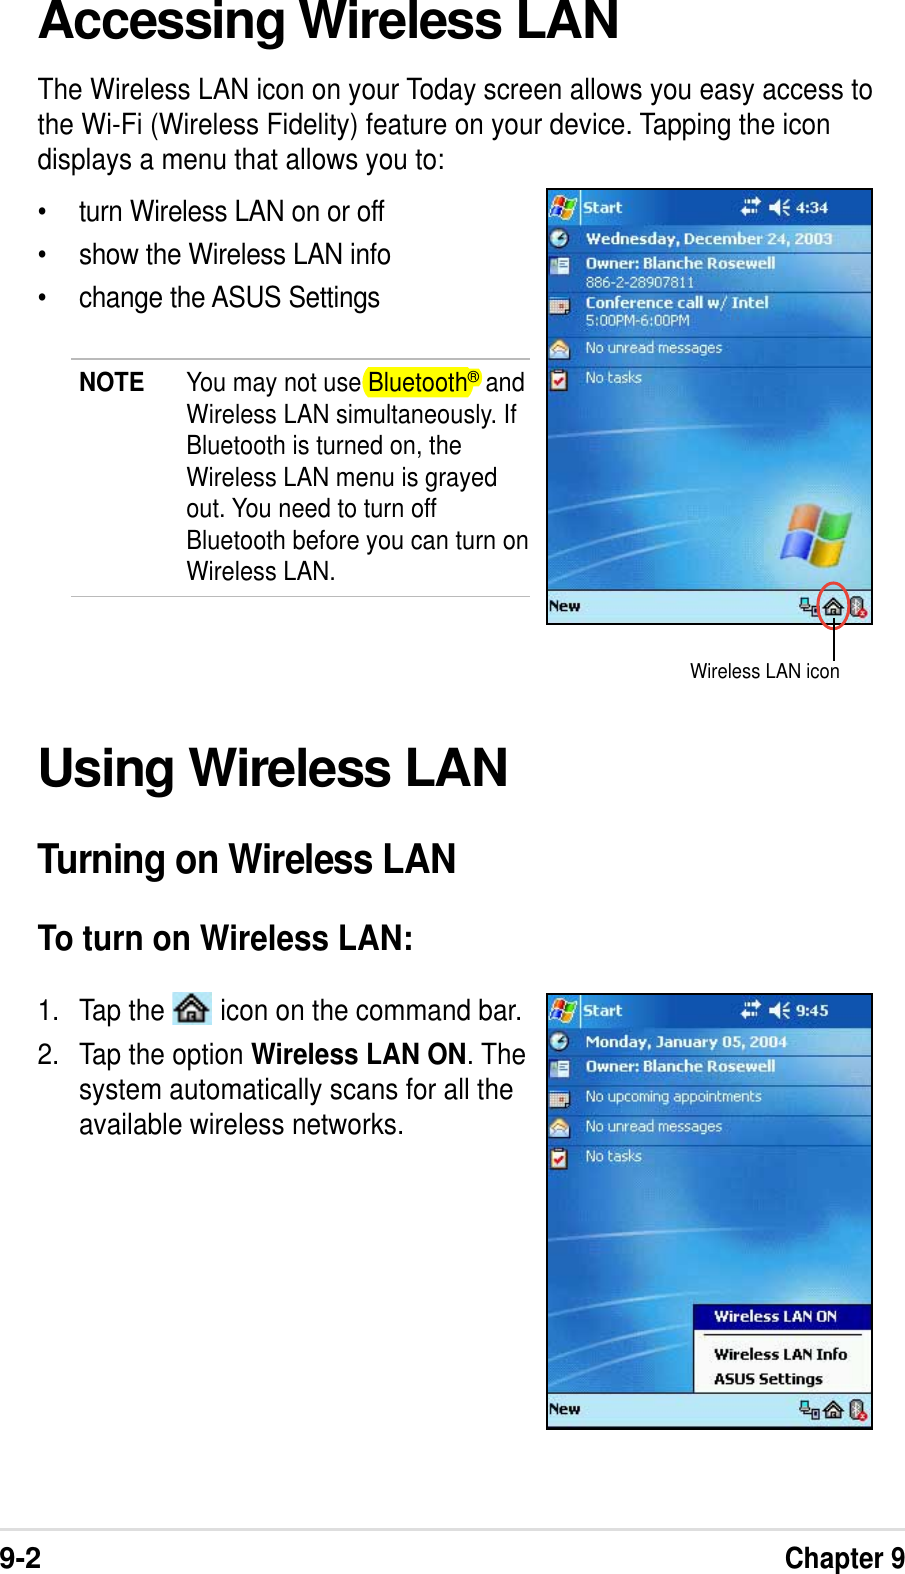 9-2Chapter 9Accessing Wireless LANThe Wireless LAN icon on your Today screen allows you easy access tothe Wi-Fi (Wireless Fidelity) feature on your device. Tapping the icondisplays a menu that allows you to:•turn Wireless LAN on or off•show the Wireless LAN info•change the ASUS SettingsNOTE You may not use Bluetooth® andWireless LAN simultaneously. IfBluetooth is turned on, theWireless LAN menu is grayedout. You need to turn offBluetooth before you can turn onWireless LAN.Using Wireless LANTurning on Wireless LANTo turn on Wireless LAN:1. Tap the   icon on the command bar.2. Tap the option Wireless LAN ON. Thesystem automatically scans for all theavailable wireless networks.Wireless LAN icon